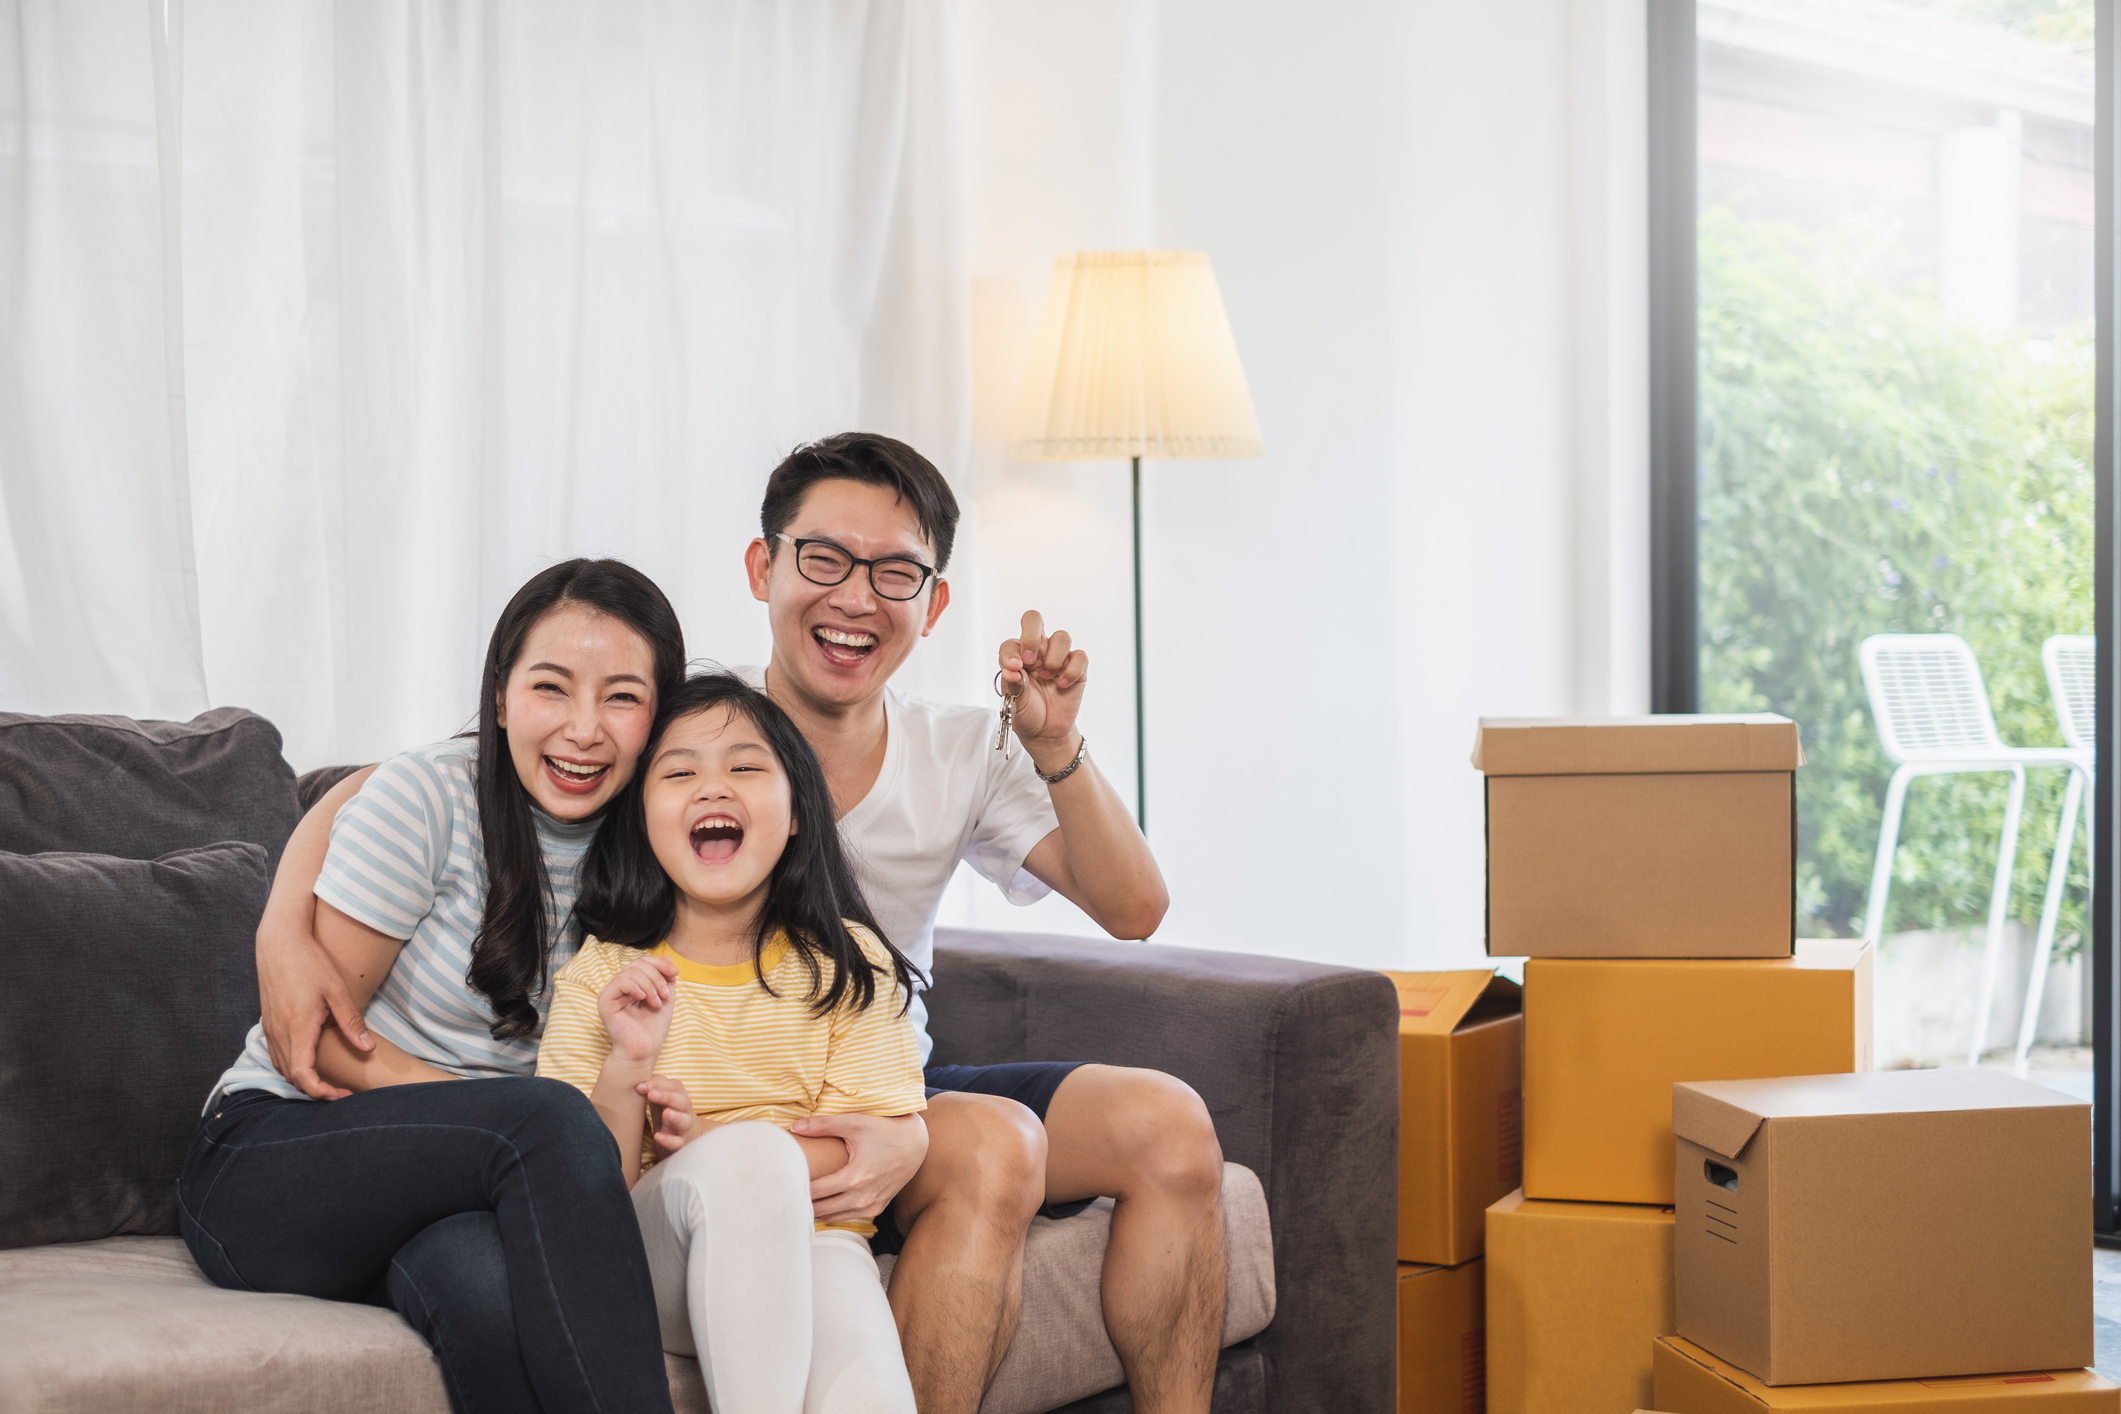 stock photo of family in living room surrounded by moving boxes and holding up keys